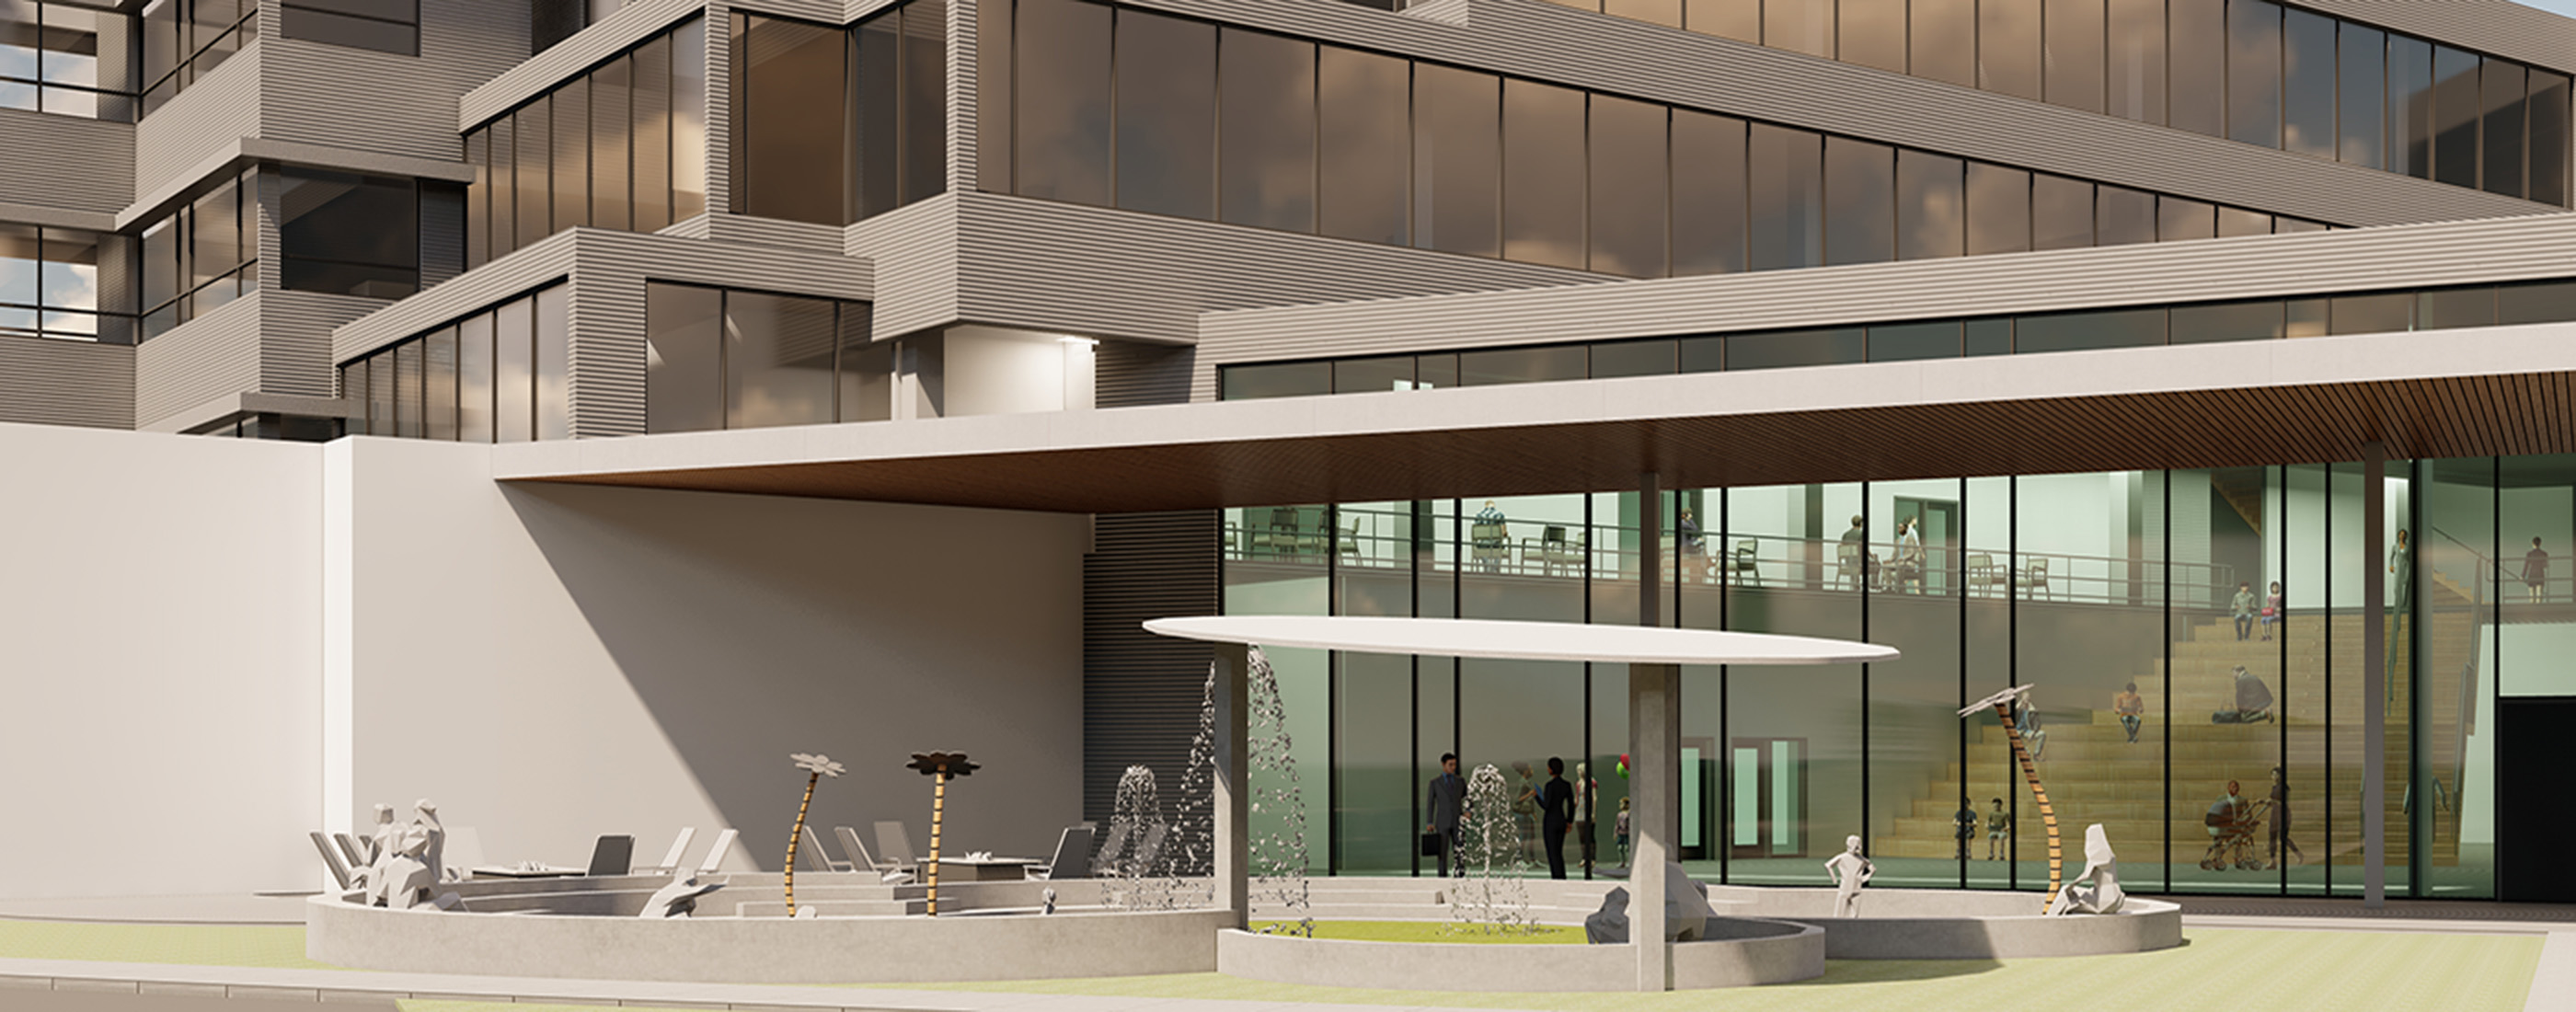 Rendering of lobby and plaza space at One Alliance Place in Reynoldsburg, Ohio